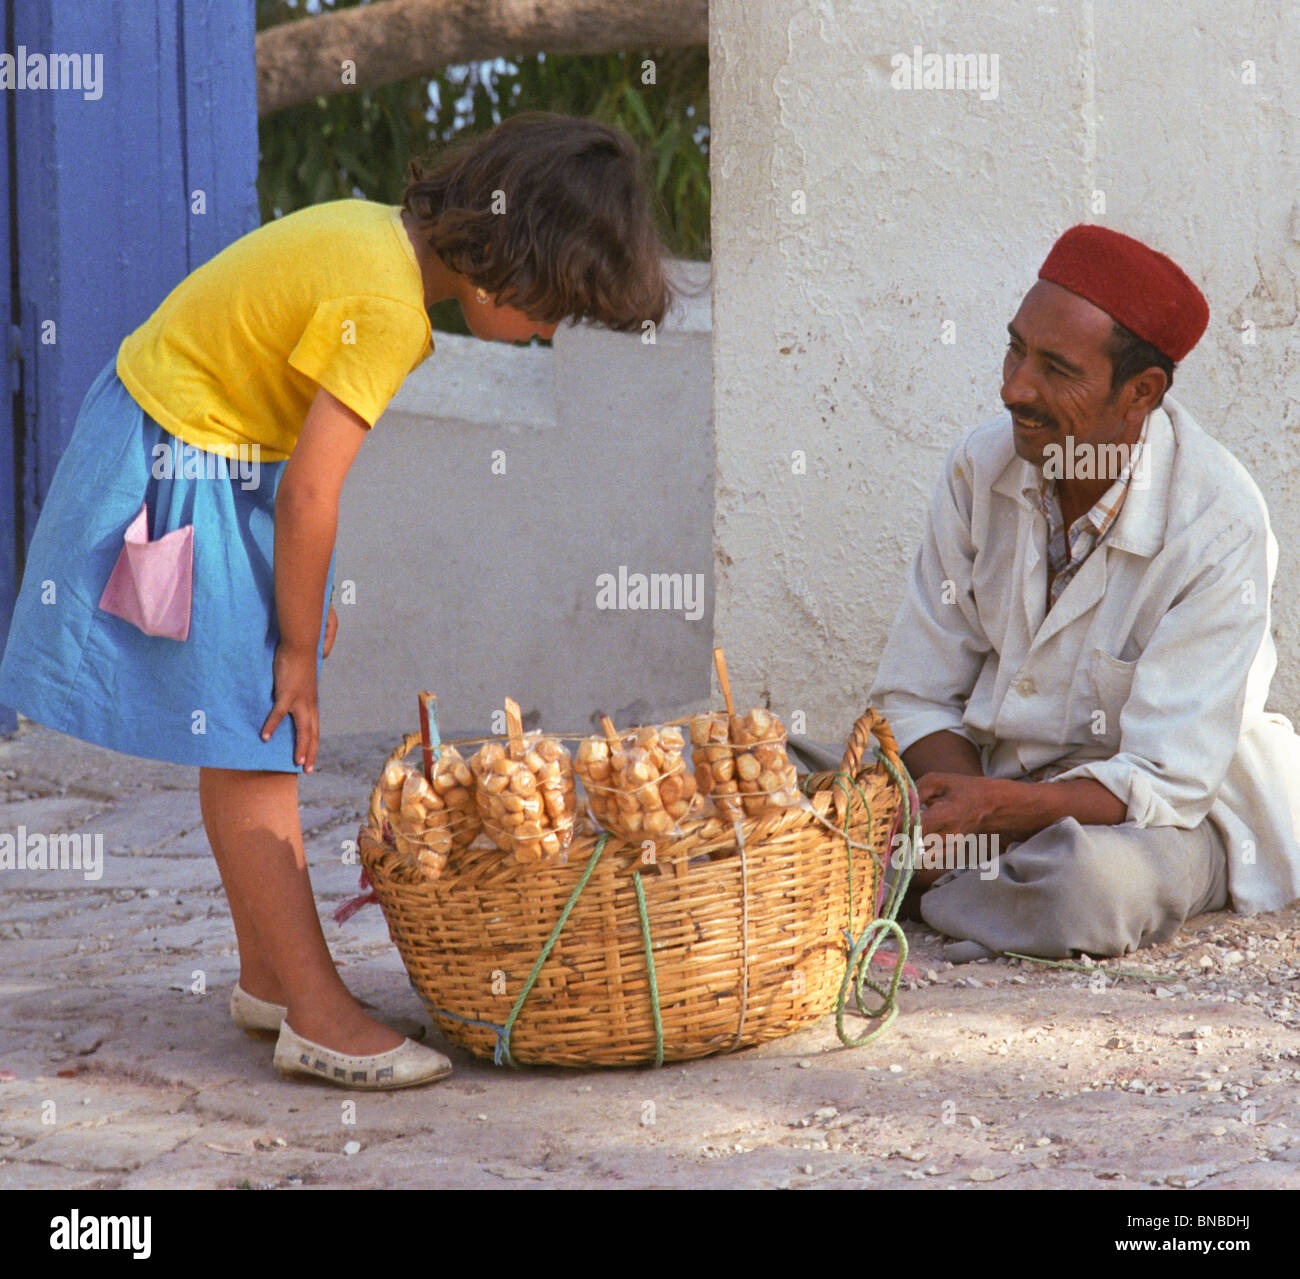 Tunisia, Sidi Bou Said. Girl Buying Cookies, Biscuits, from Man Wearing a Chechia, a Traditional Tunisian Hat. Stock Photo